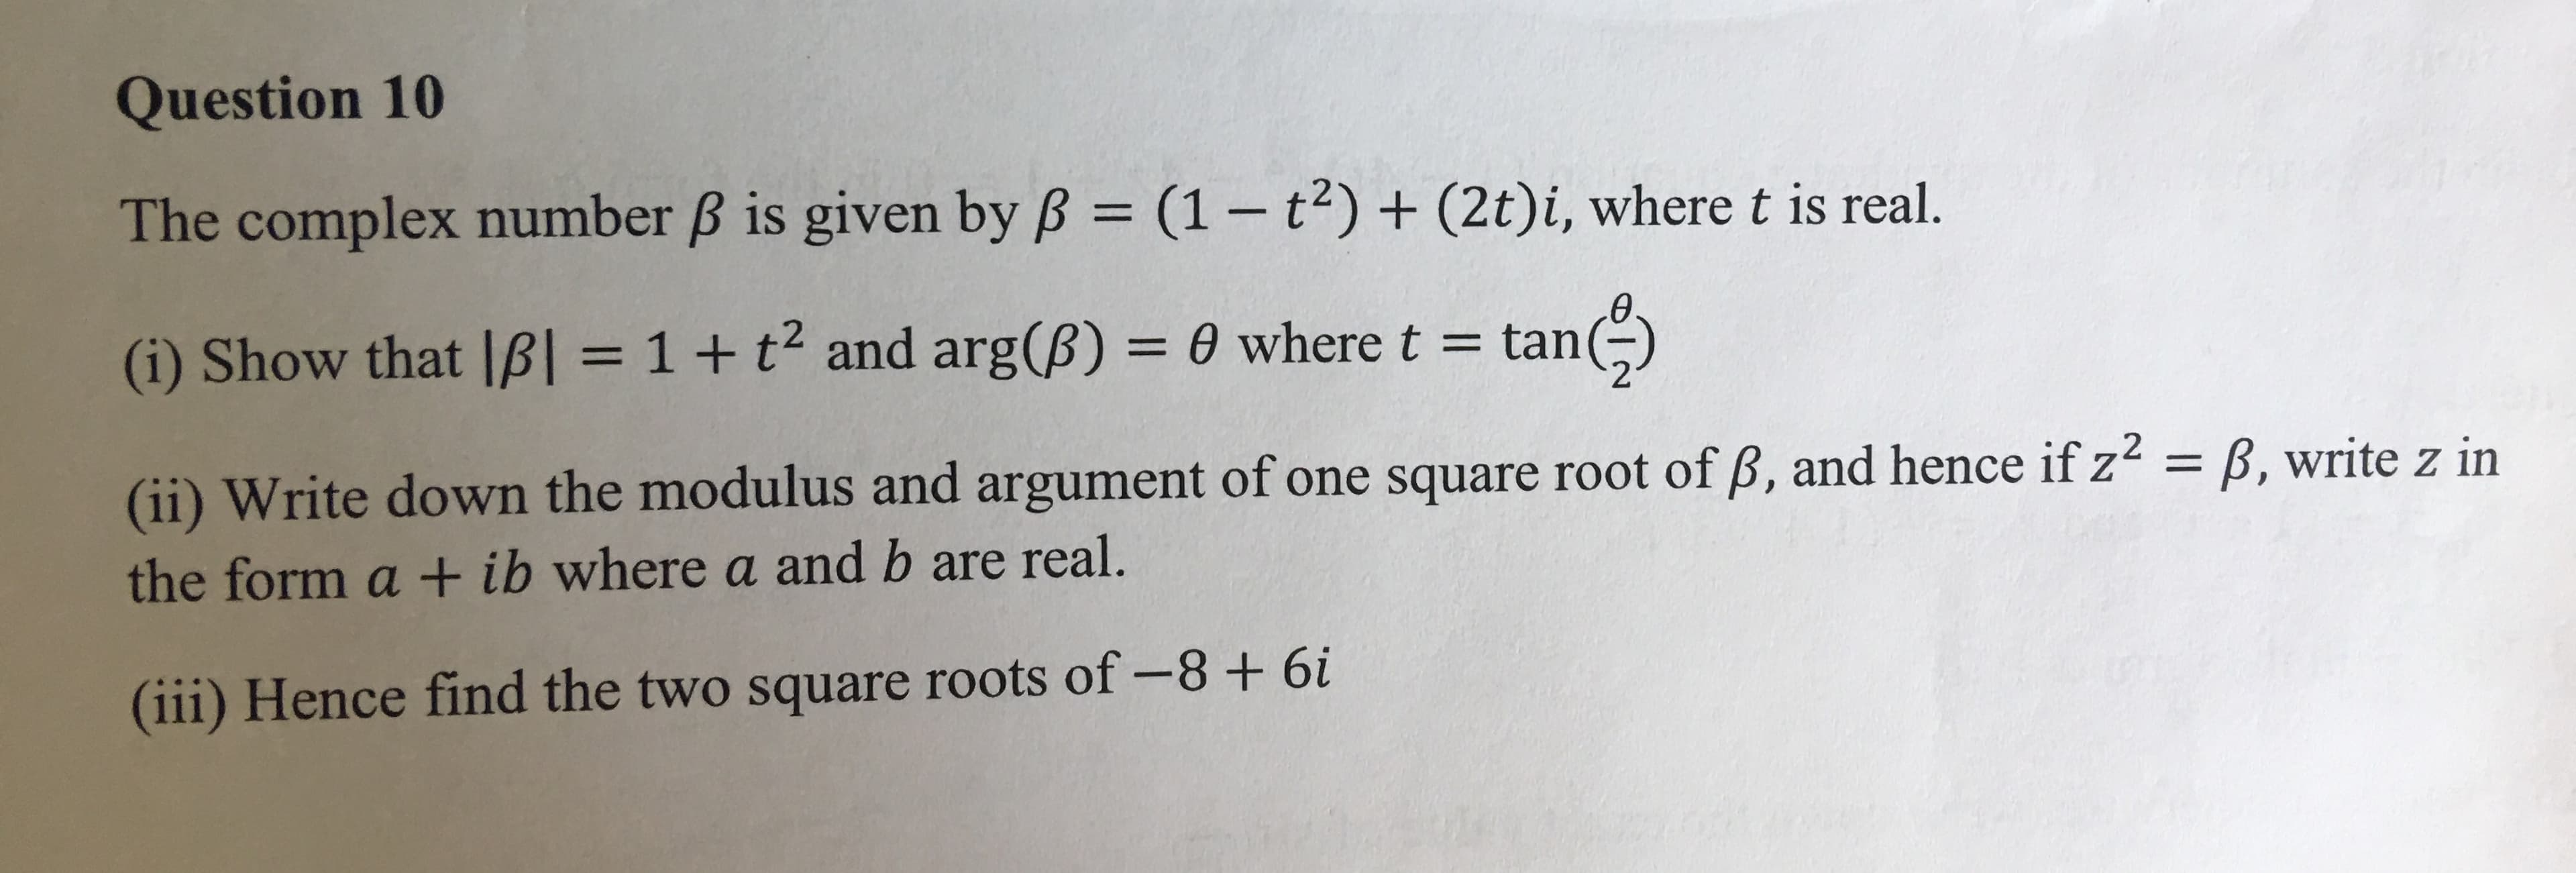 Question 10
The complex number B is given by B (1- t) + (2t)i, where t is real.
II
tan)
(i) Show that IB = 1 + t2 and arg(B) 0 where t = t
(ii) Write down the modulus and argument of one square root of B, and hence if z2 = B, write z in
the form a + ib where a and b are real.
(iii) Hence find the two square roots of -8+ 6i
